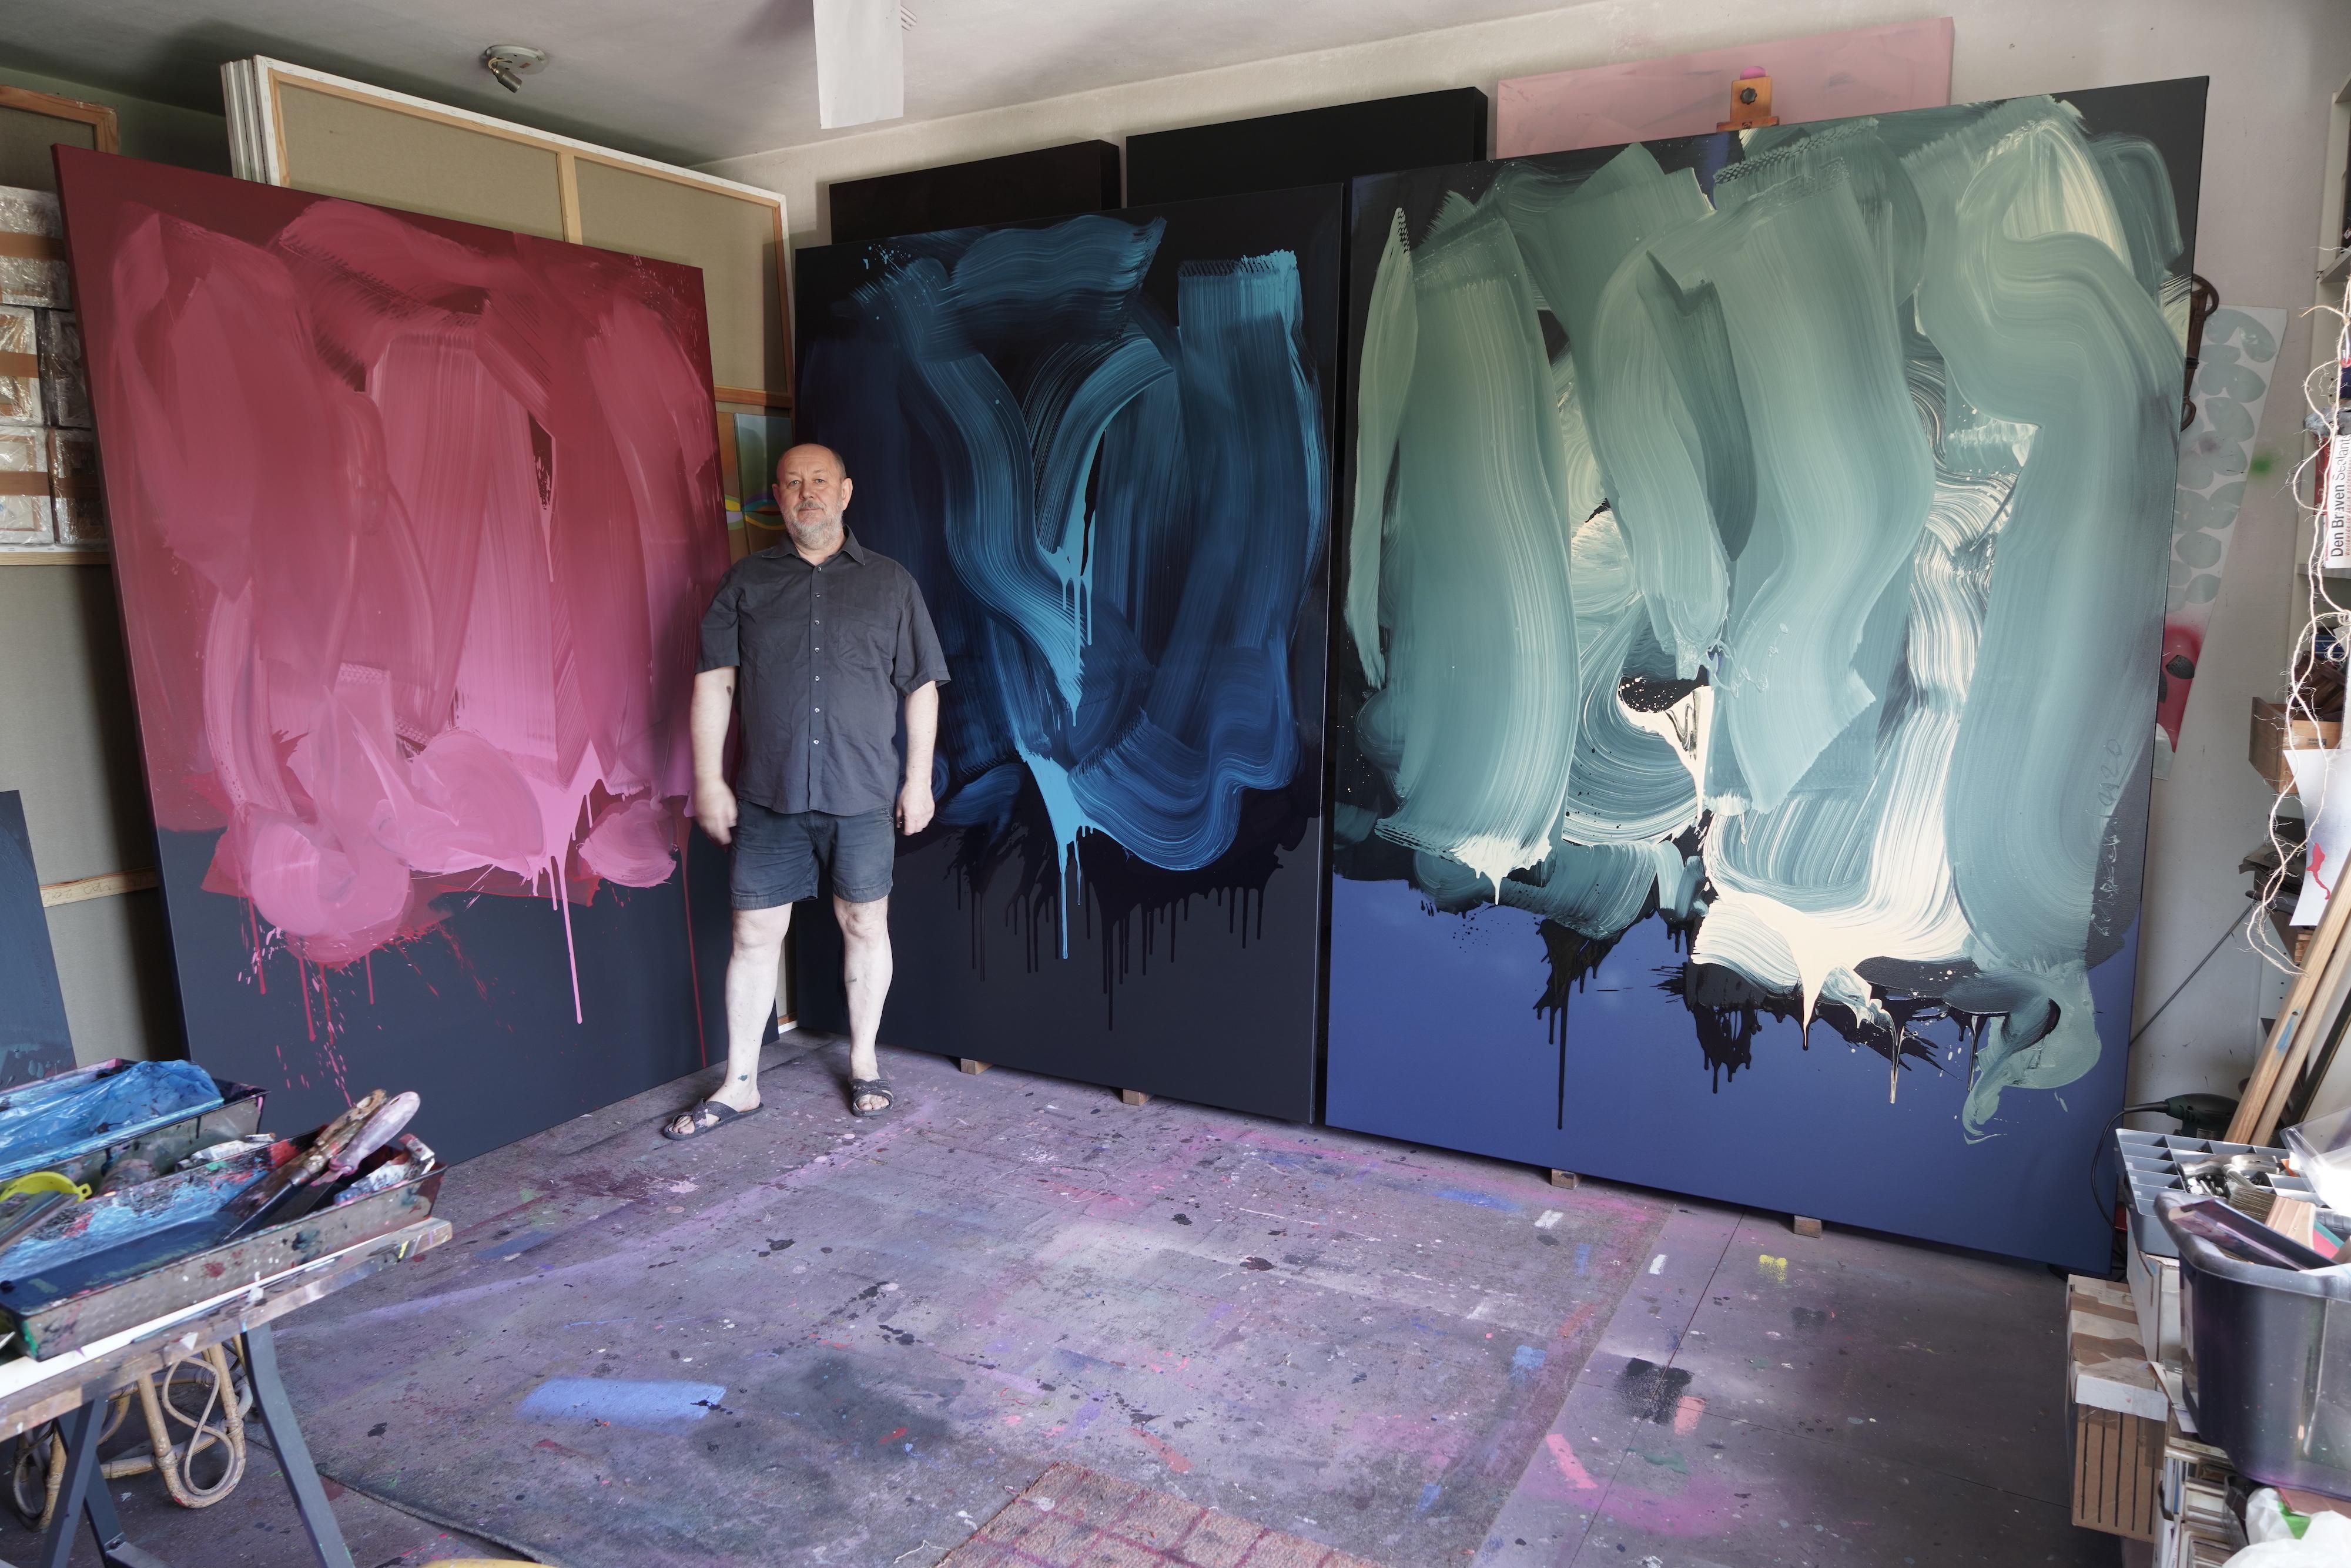 Grzegorz Radecki is a Professor at the Academy of Fine Arts in Gdansk Poland

Artist about  his work:

BLOBS. THE CHARM OF DRIPPING PAINT

Flowing peacefully in the slow current of a narrow trickle between the feeling of senselessness and some